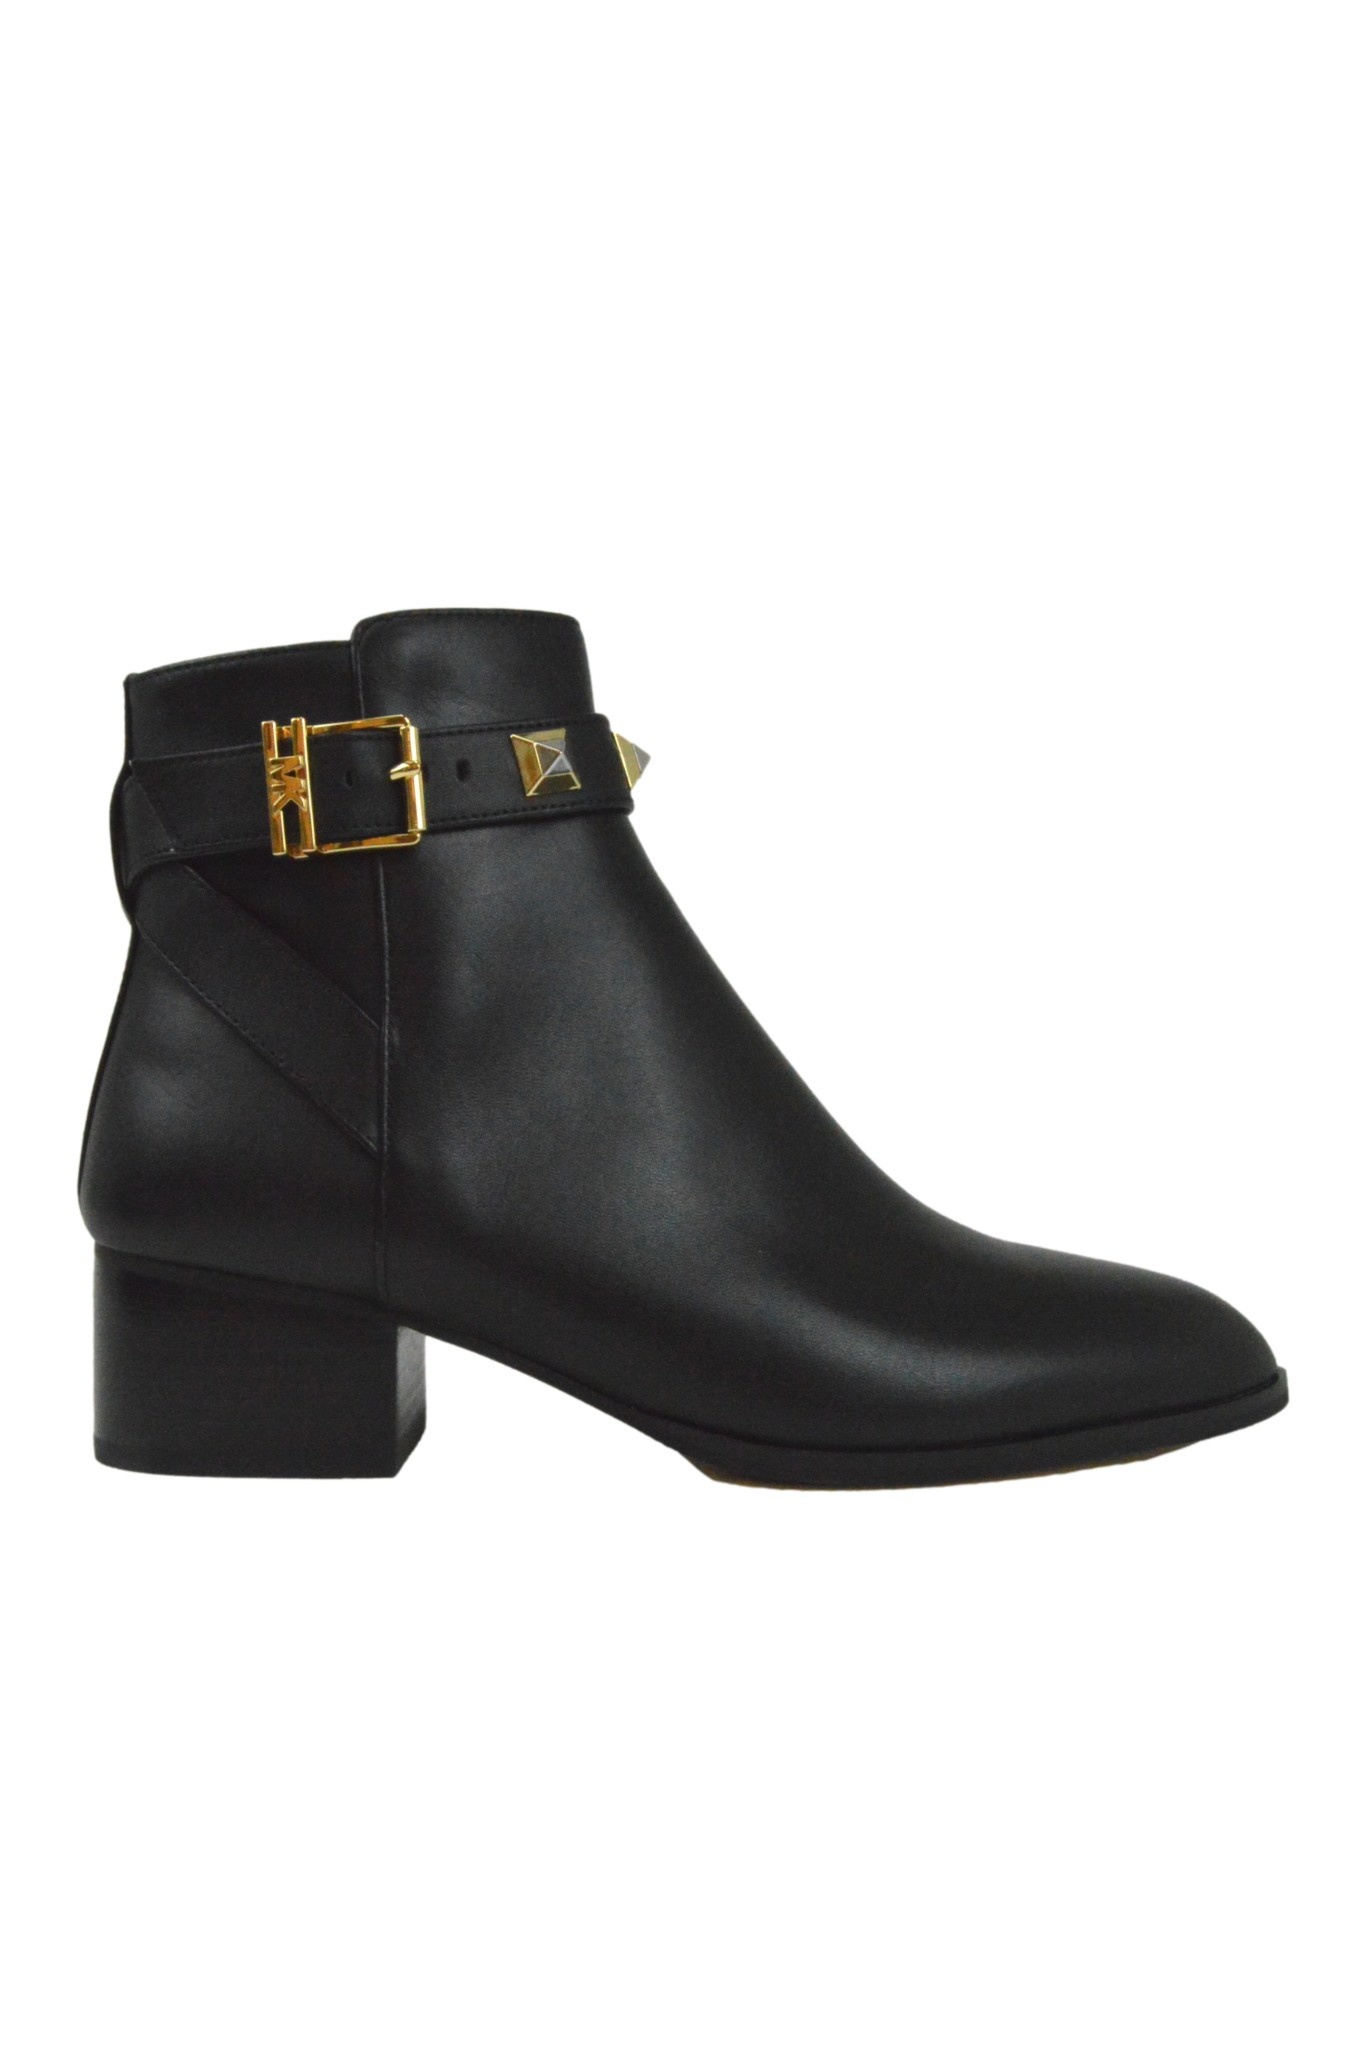 Michael Kors Britton Ankle Boot Leather Black - OUTFITonline